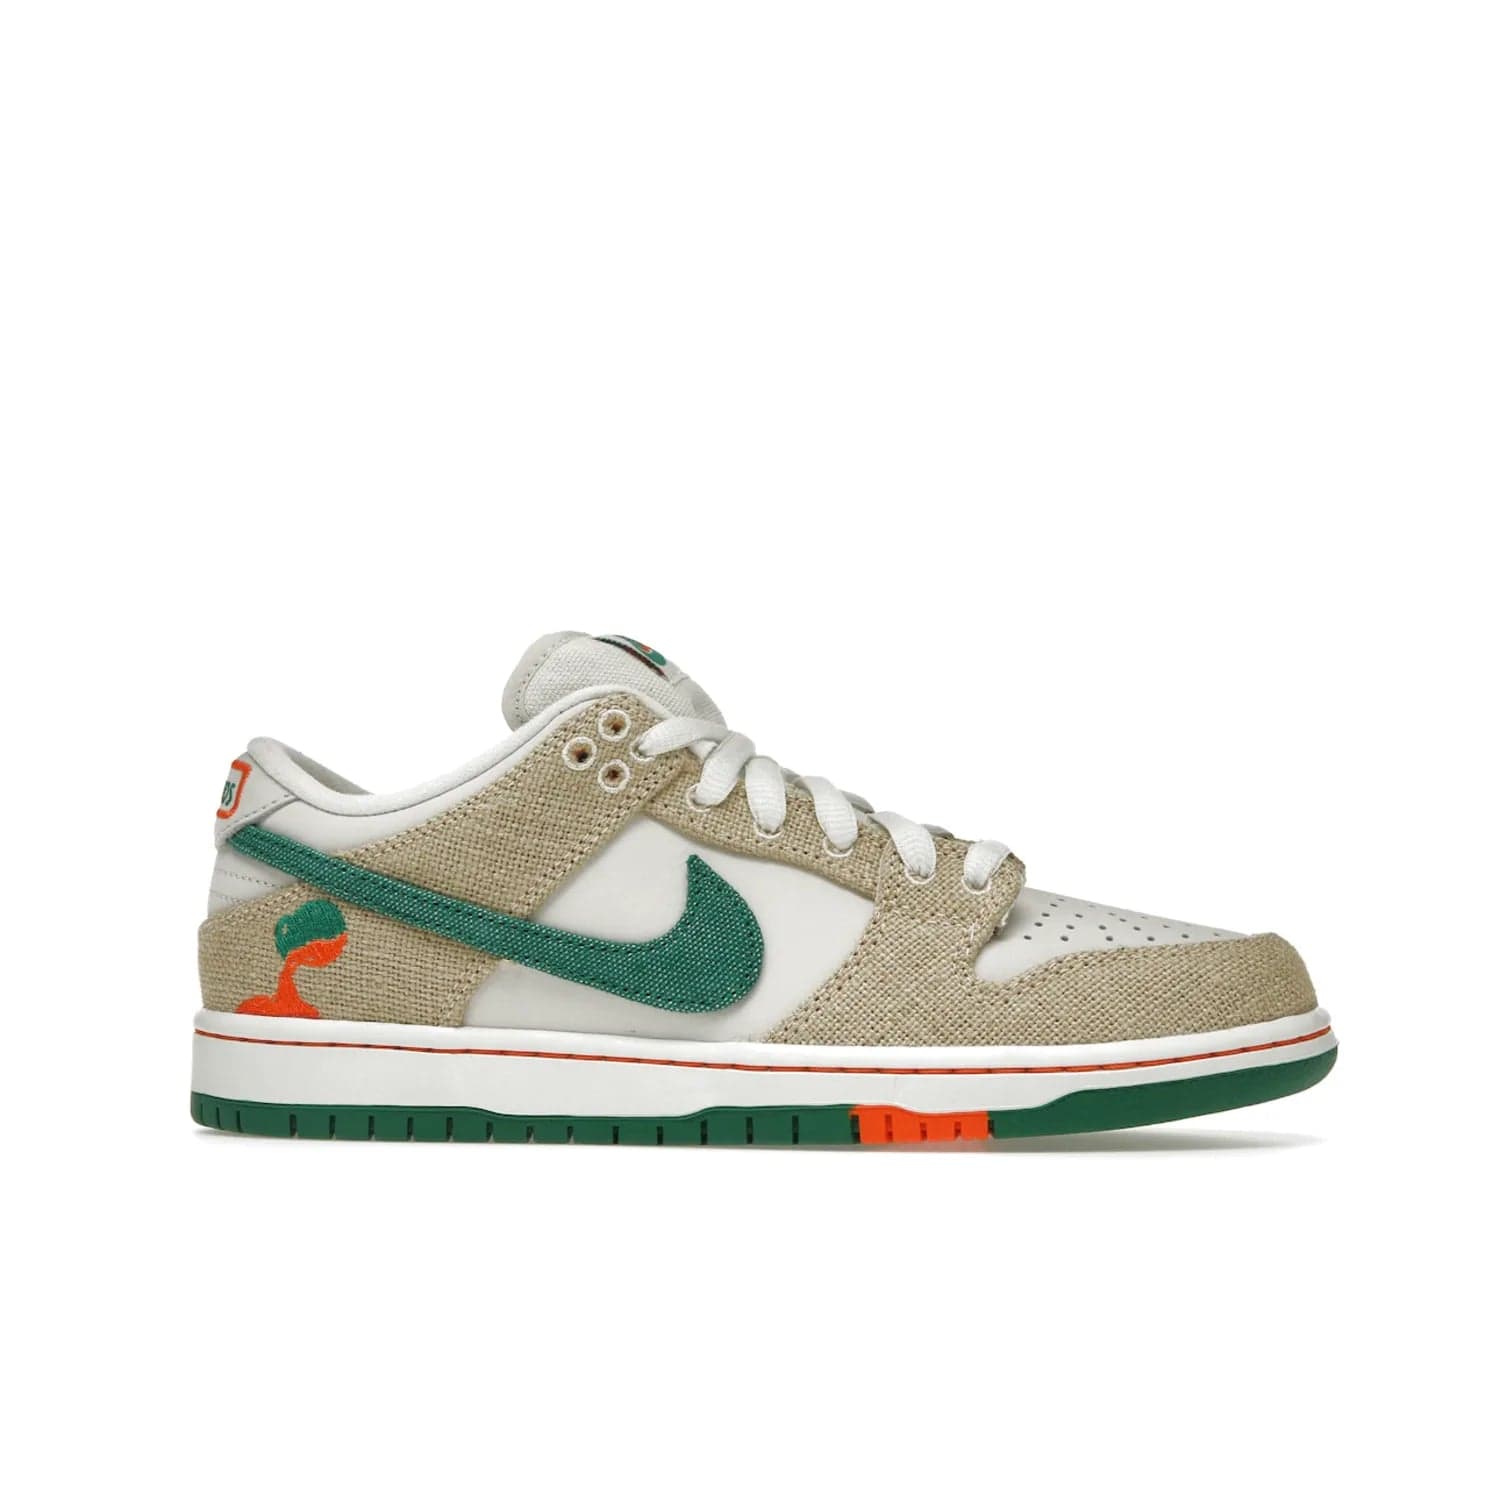 Nike SB Dunk Low Jarritos - Image 2 - Only at www.BallersClubKickz.com - Shop limited edition Nike SB Dunk Low Jarritos! Crafted with white leather and tear-away canvas materials with green accents. Includes orange, green, and white laces to customize your look. Available now.